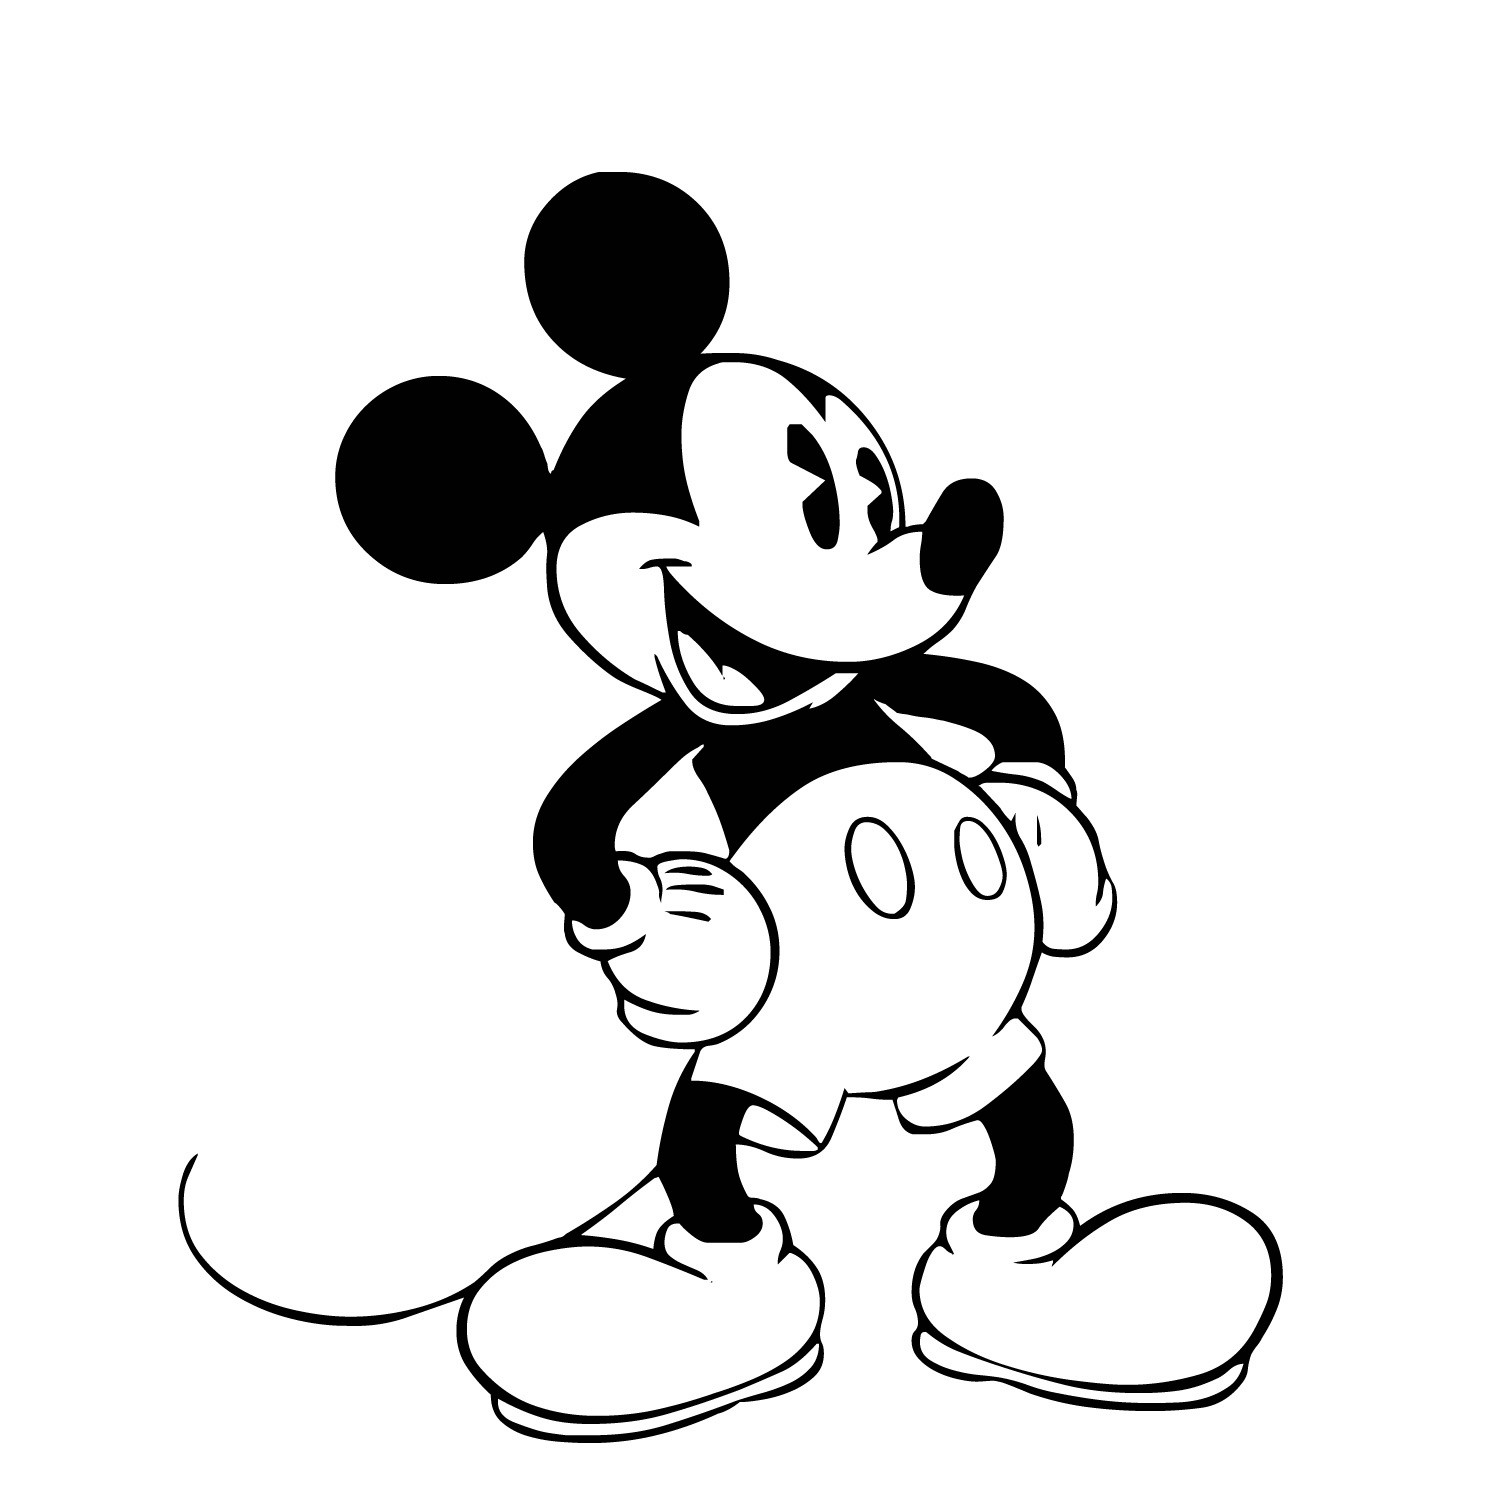 Mickey silhouette clipart black and white